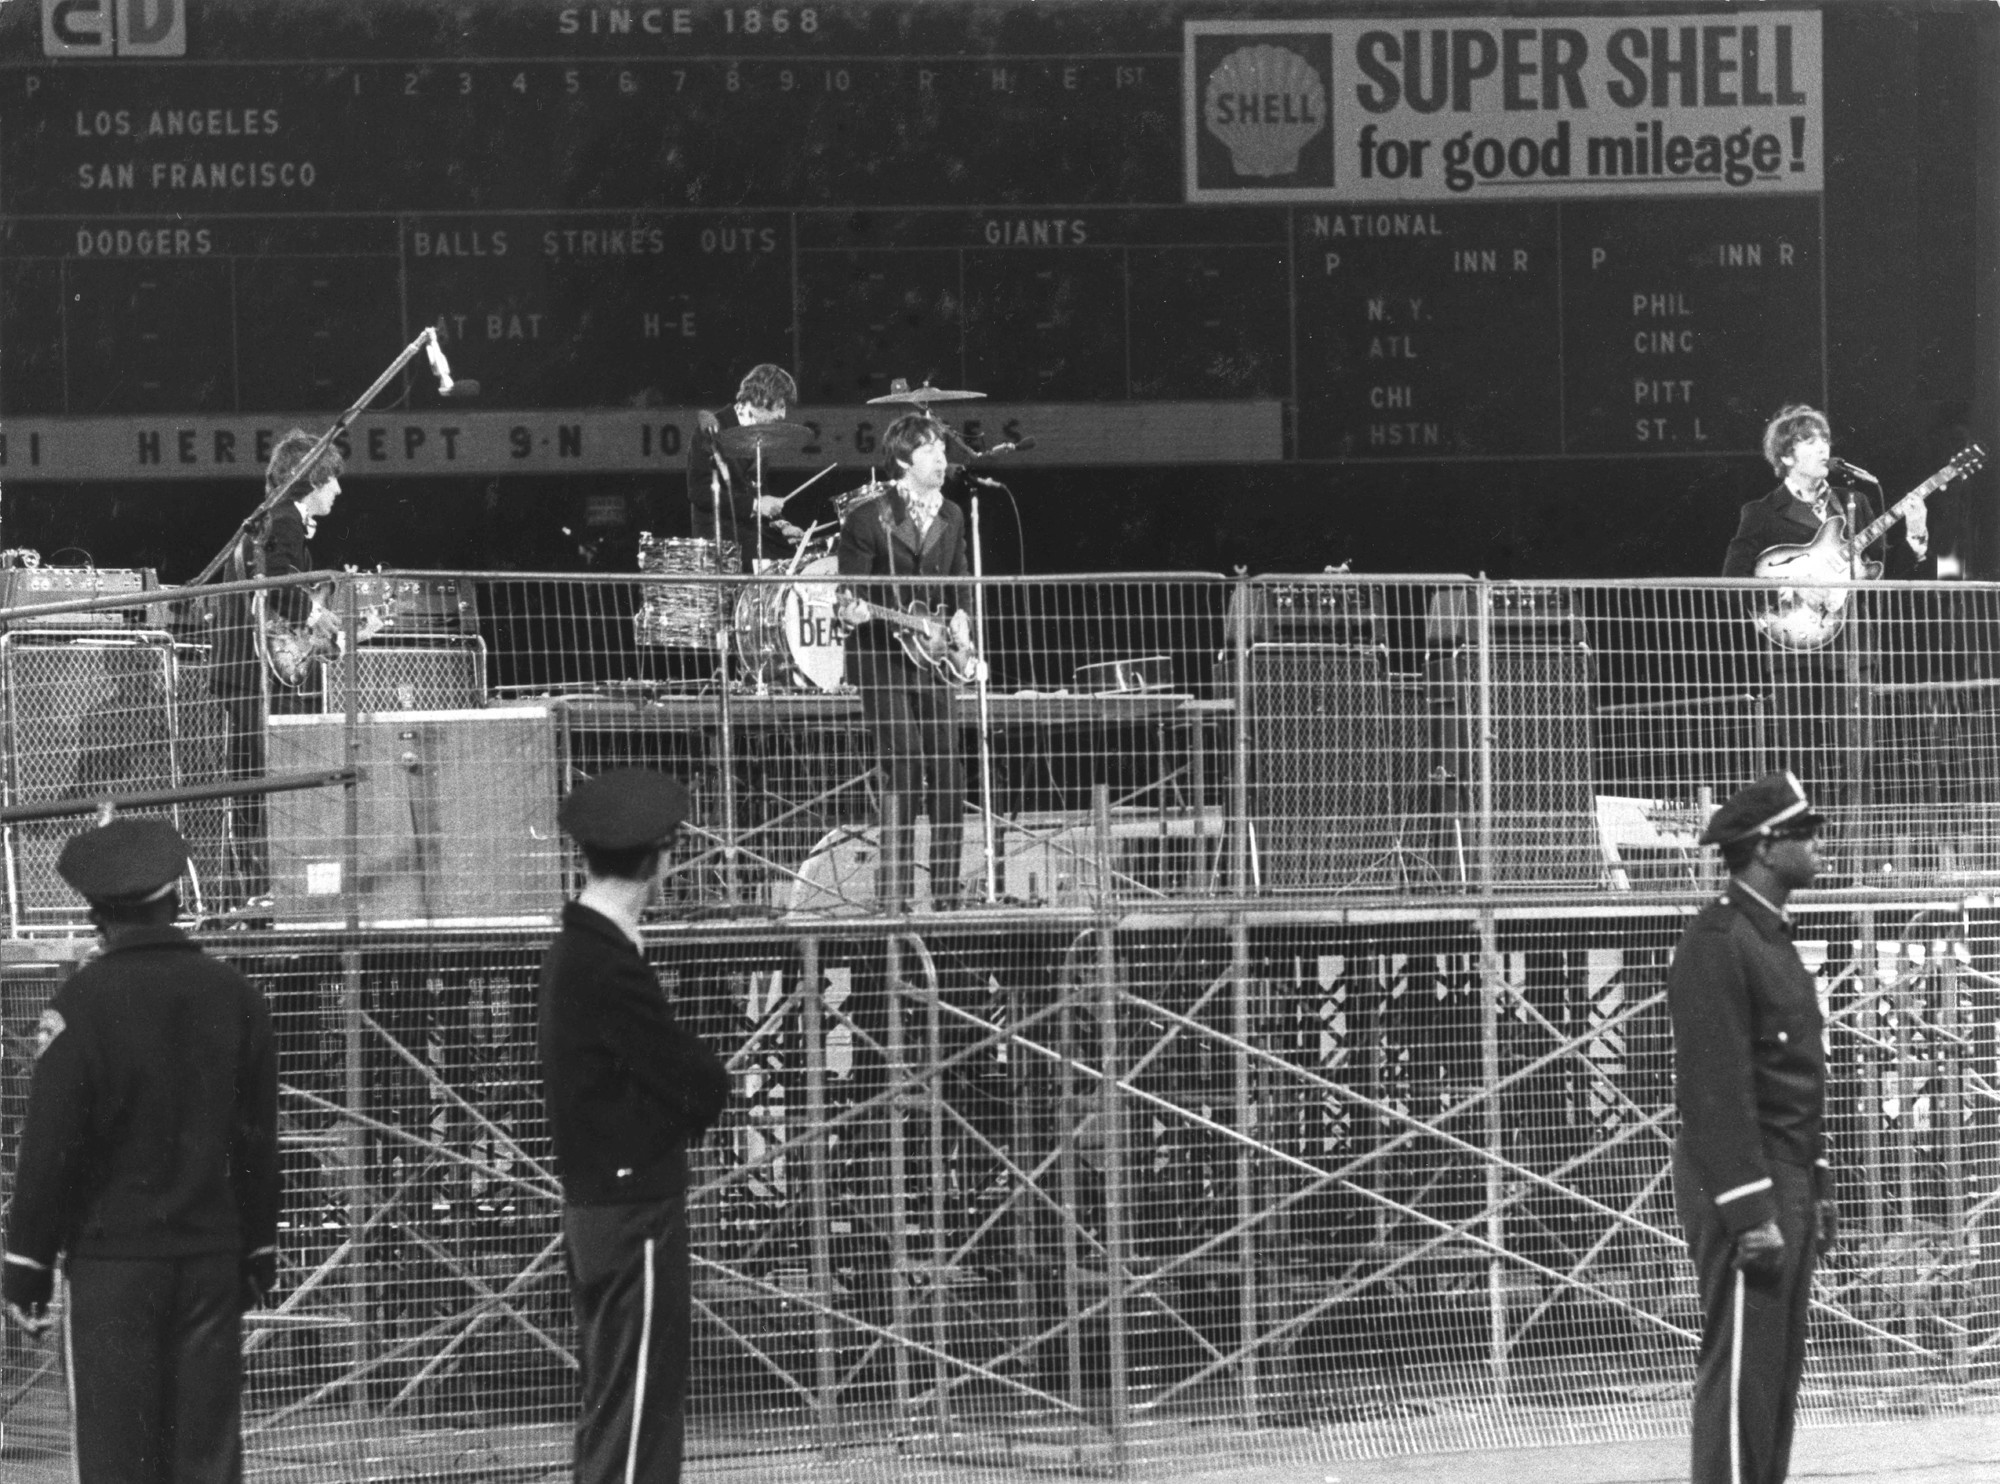 The Beatles perform at Candlestick Park in San Francisco on Aug. 29, 1966.